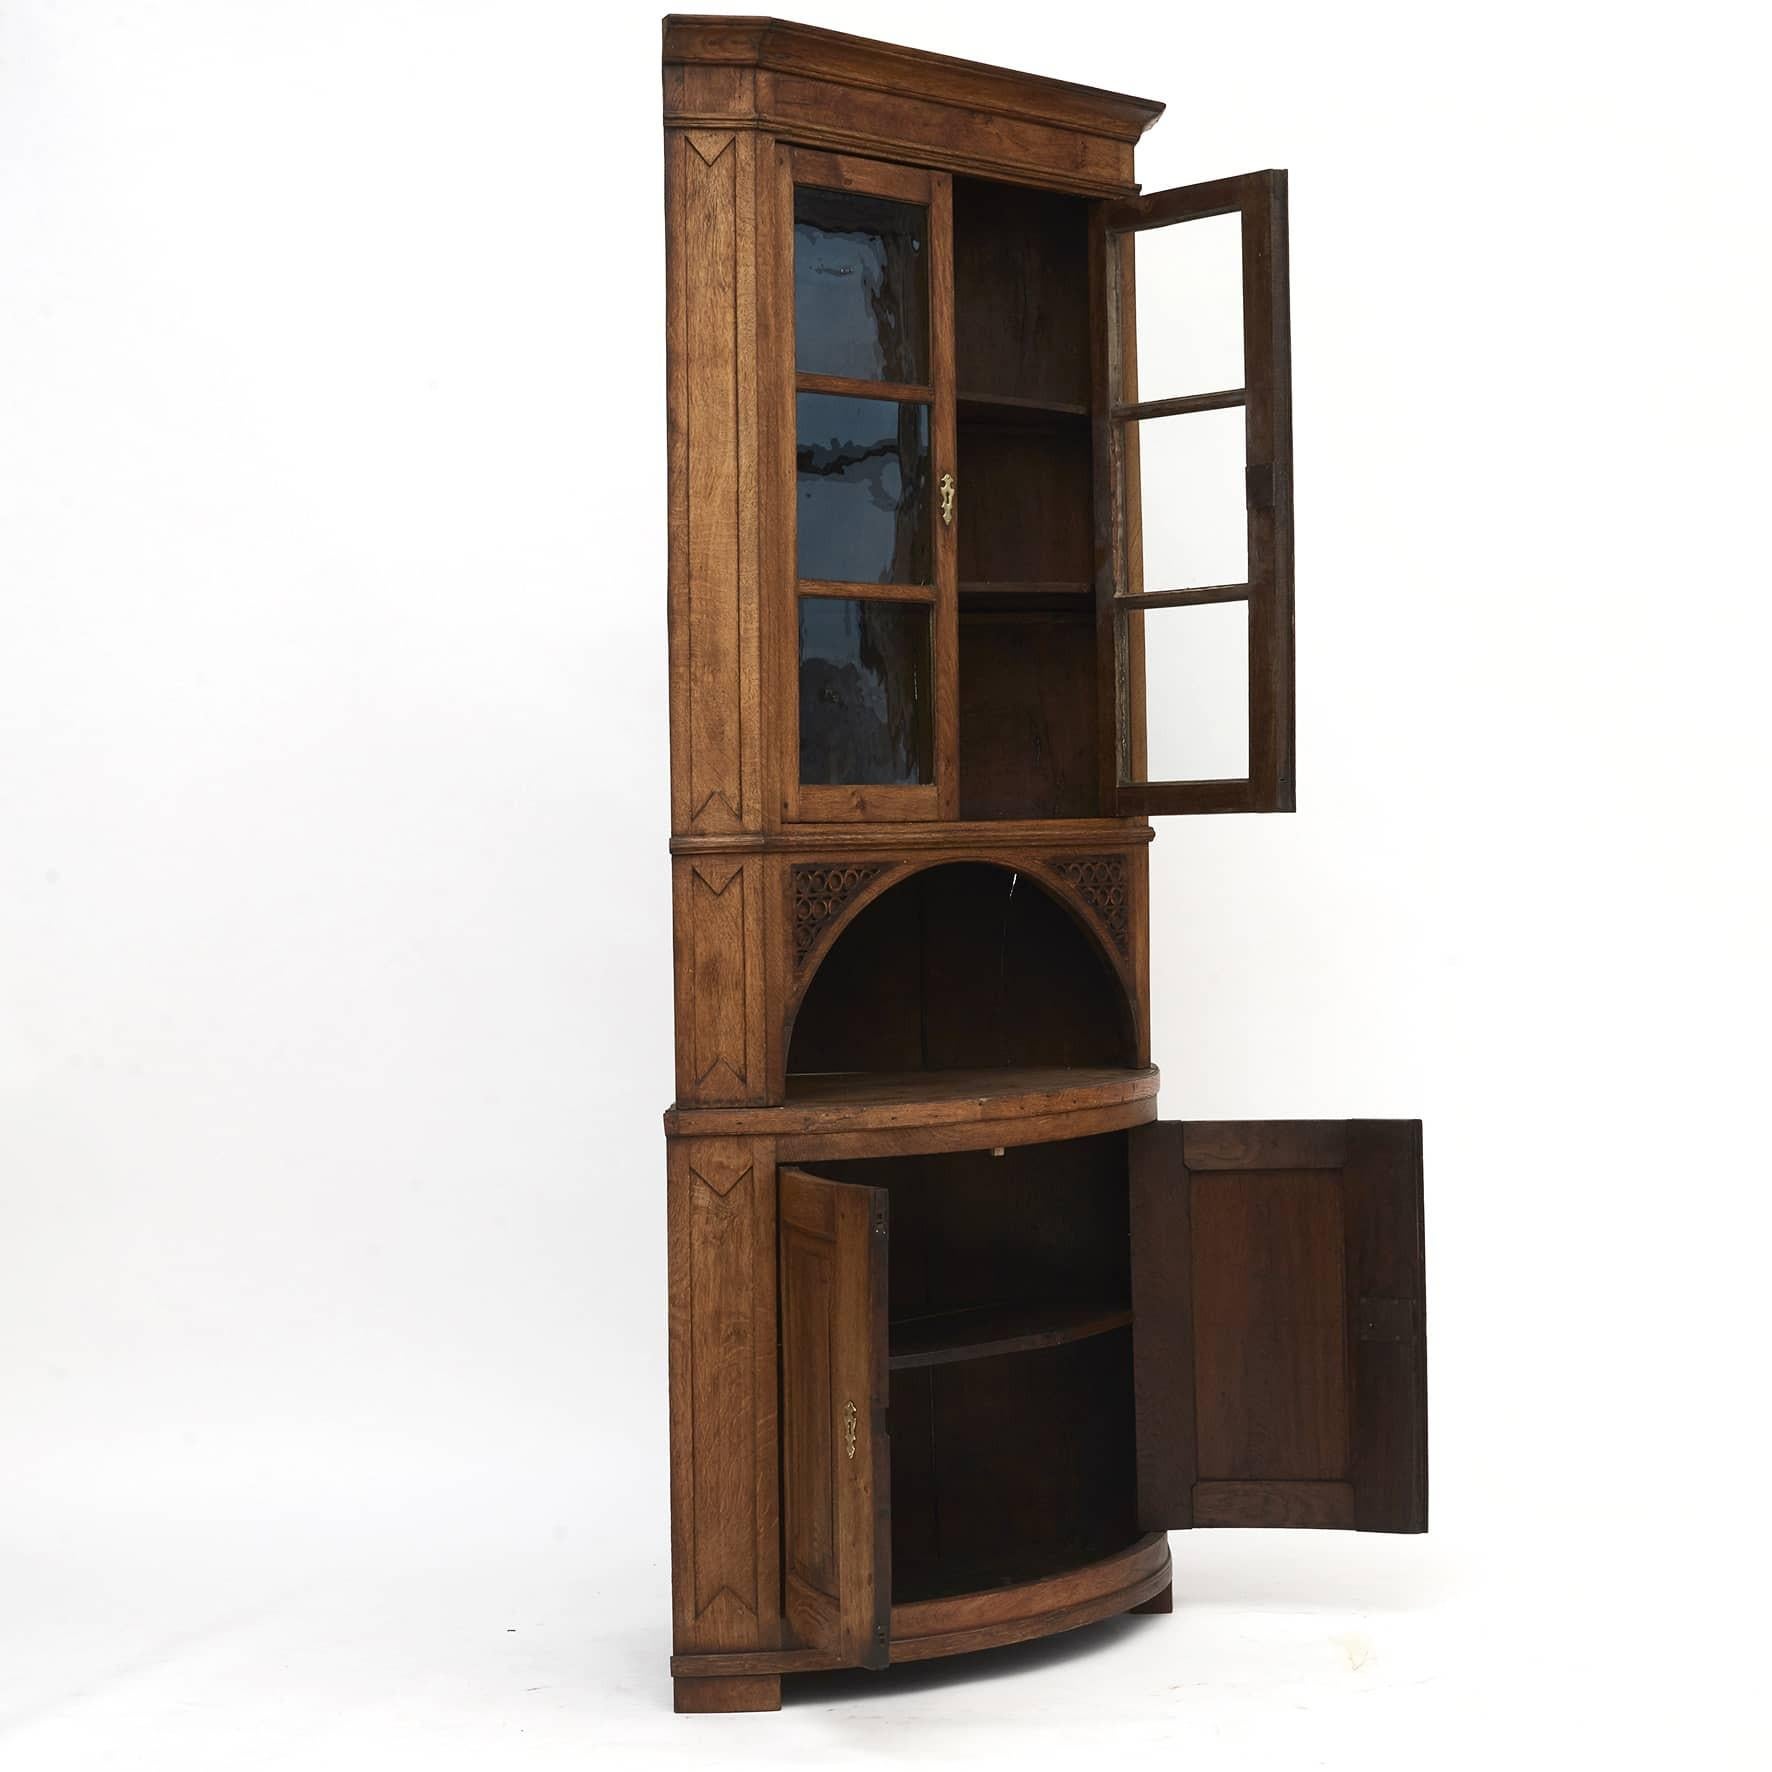 Louis XVI corner cabinet, made of oak in two parts.
Upper cabinet with a straight front and a pair of doors with bars and original glass in the fields.
Upper cabinet D: 57 cm, with profiled fillings.
Lower part D: 86 cm, pair of doors with curved